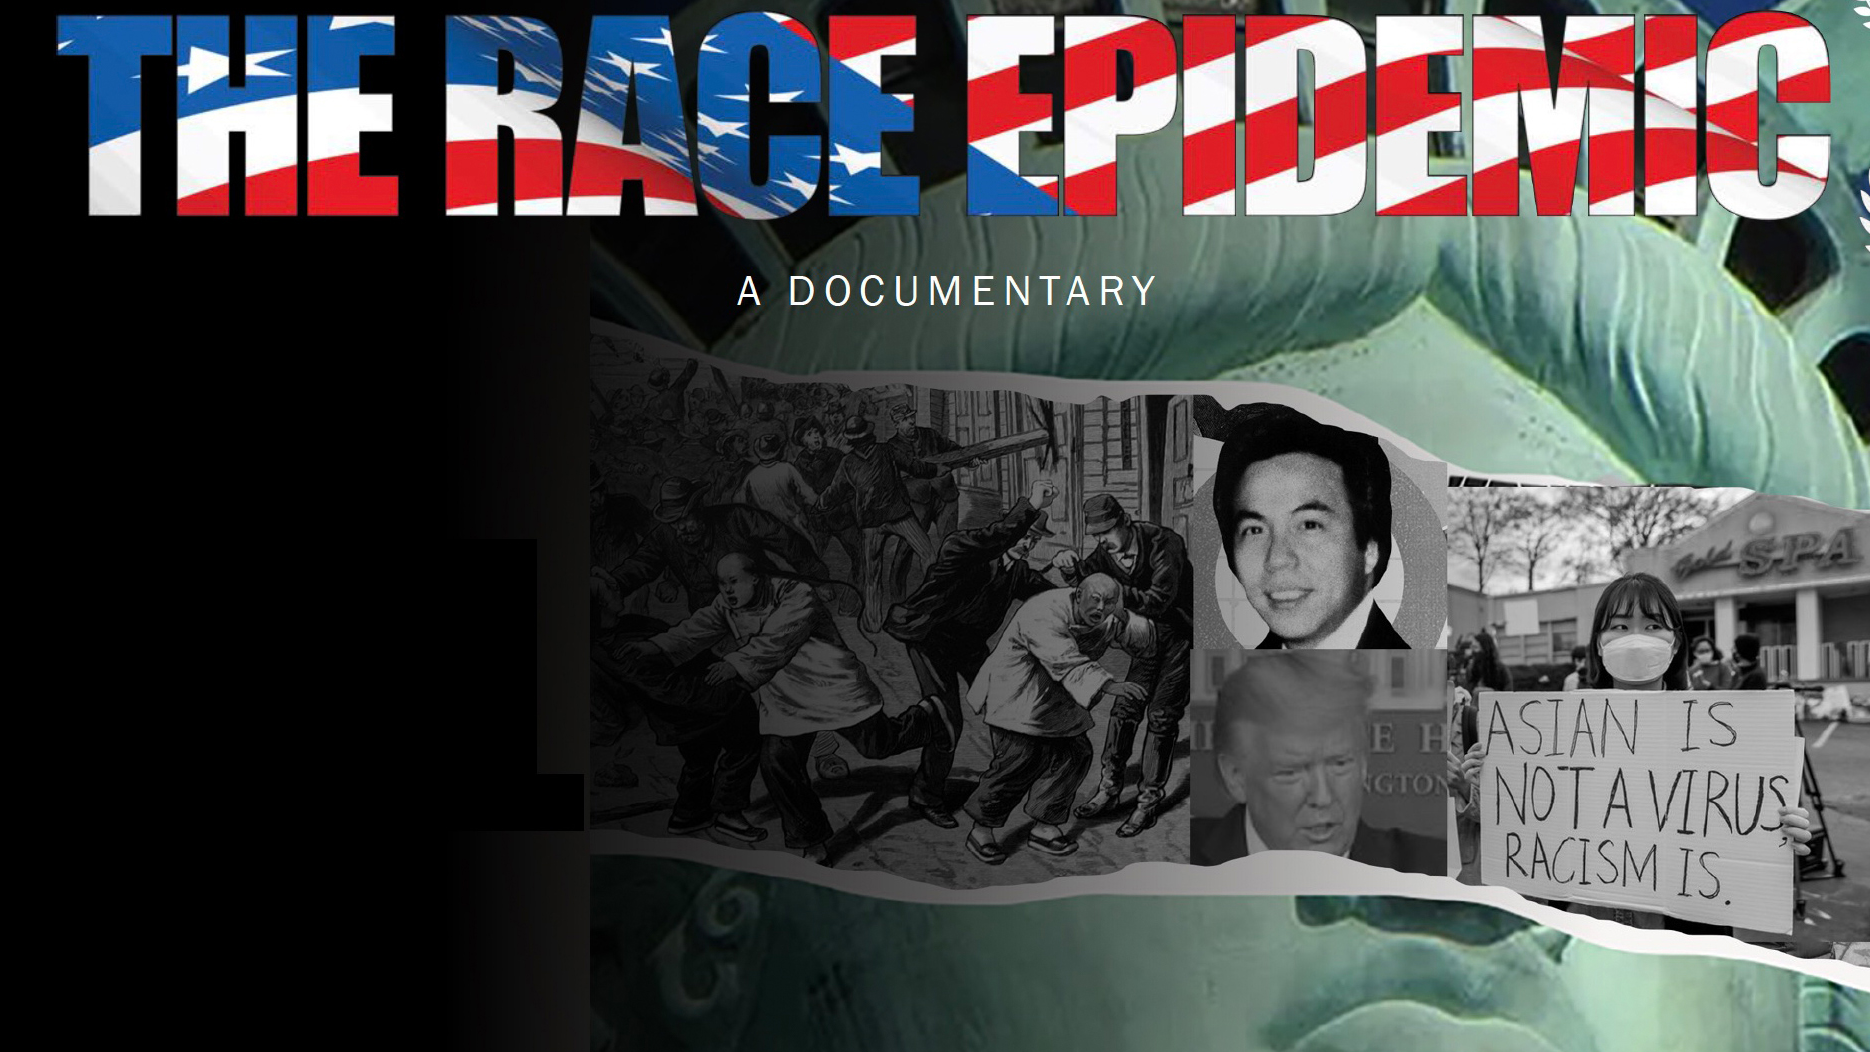 Check your local listings for The Race Epidemic airing on yor local station.